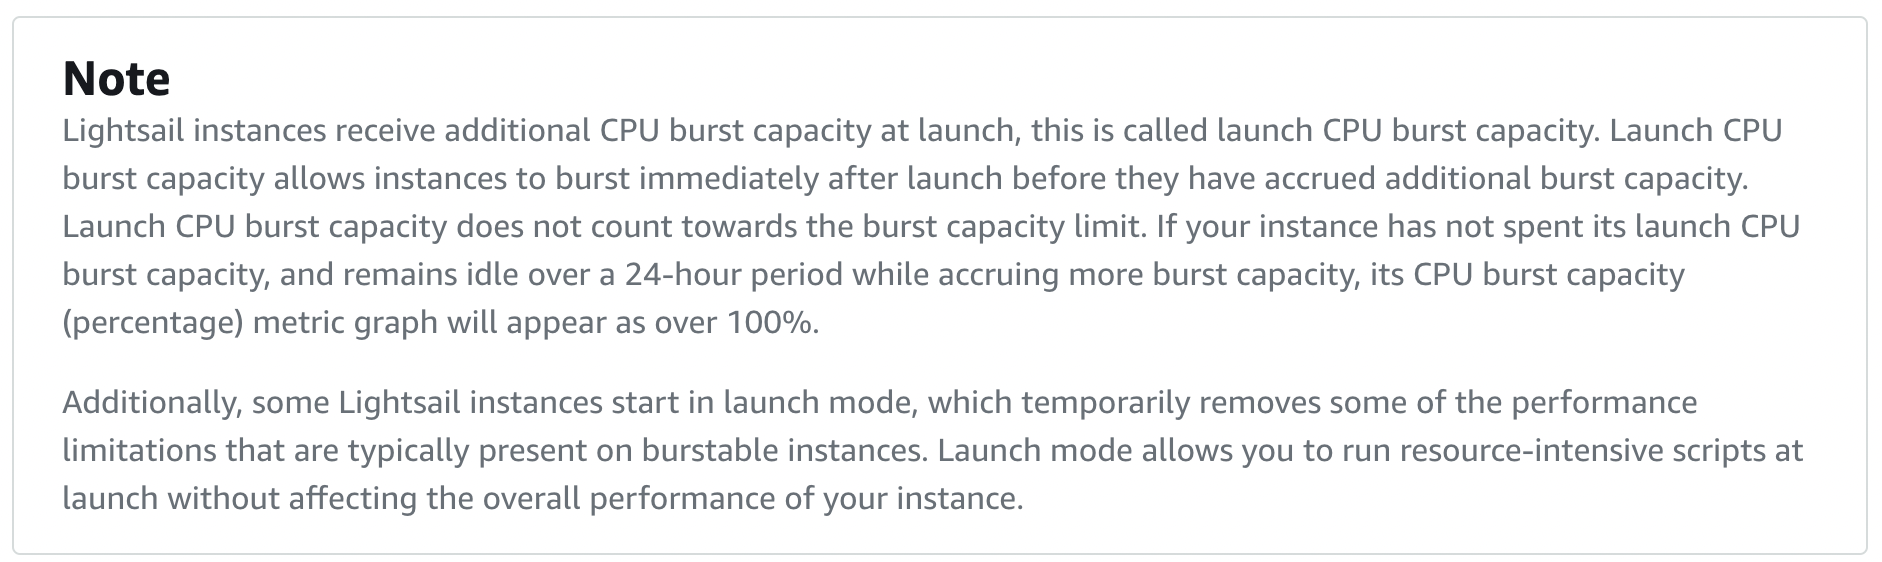 "Launch mode" as noted here